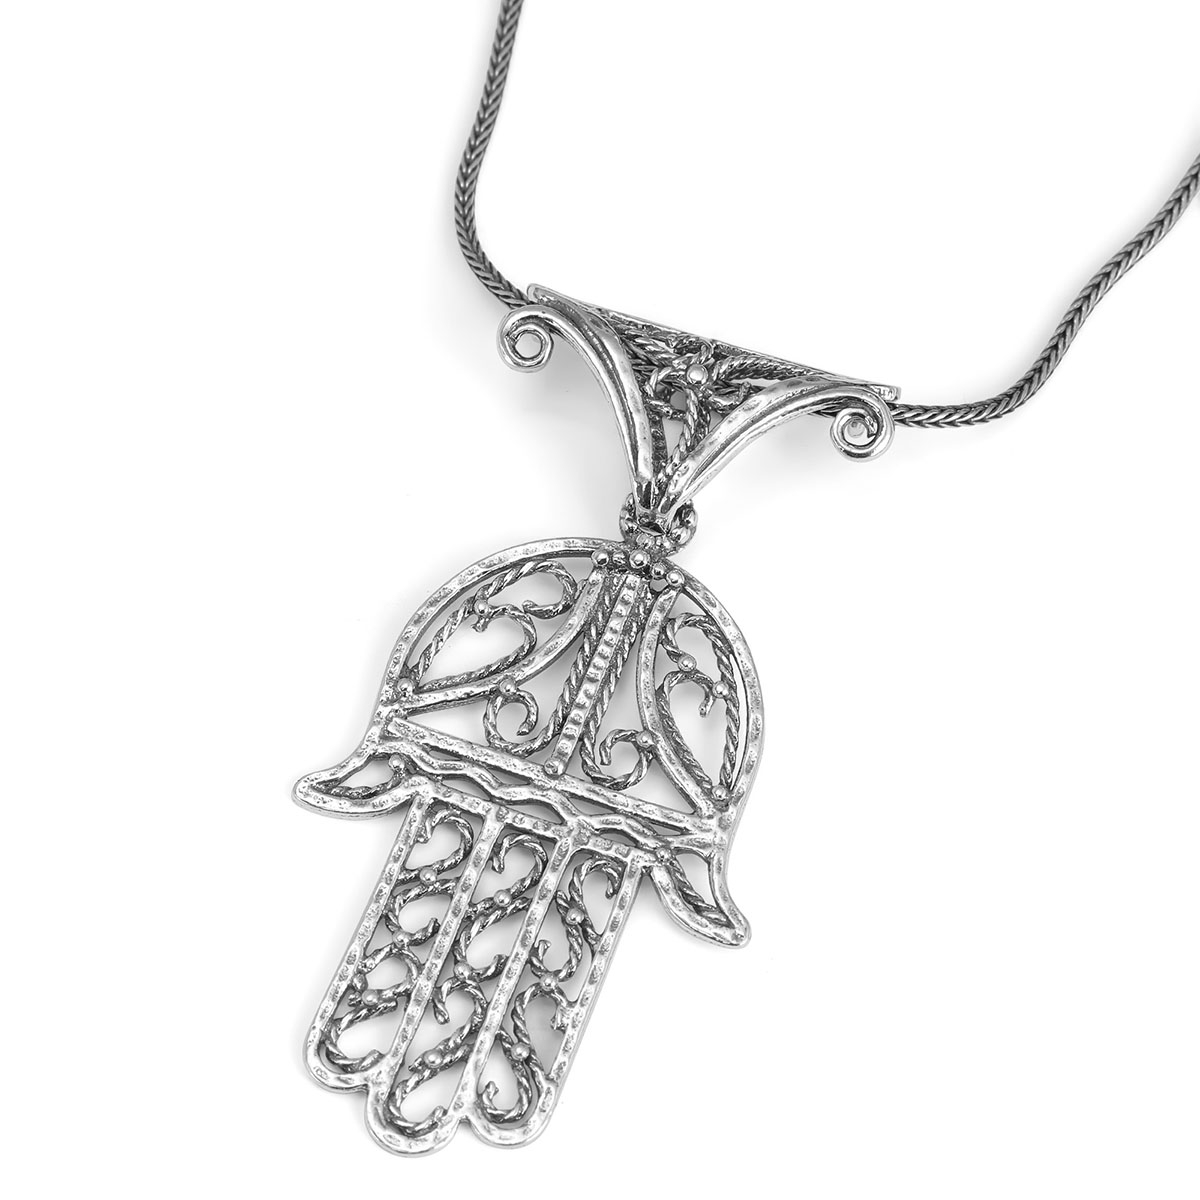 Refined Sterling Silver Hamsa Necklace With Filigree Rope Design - 1